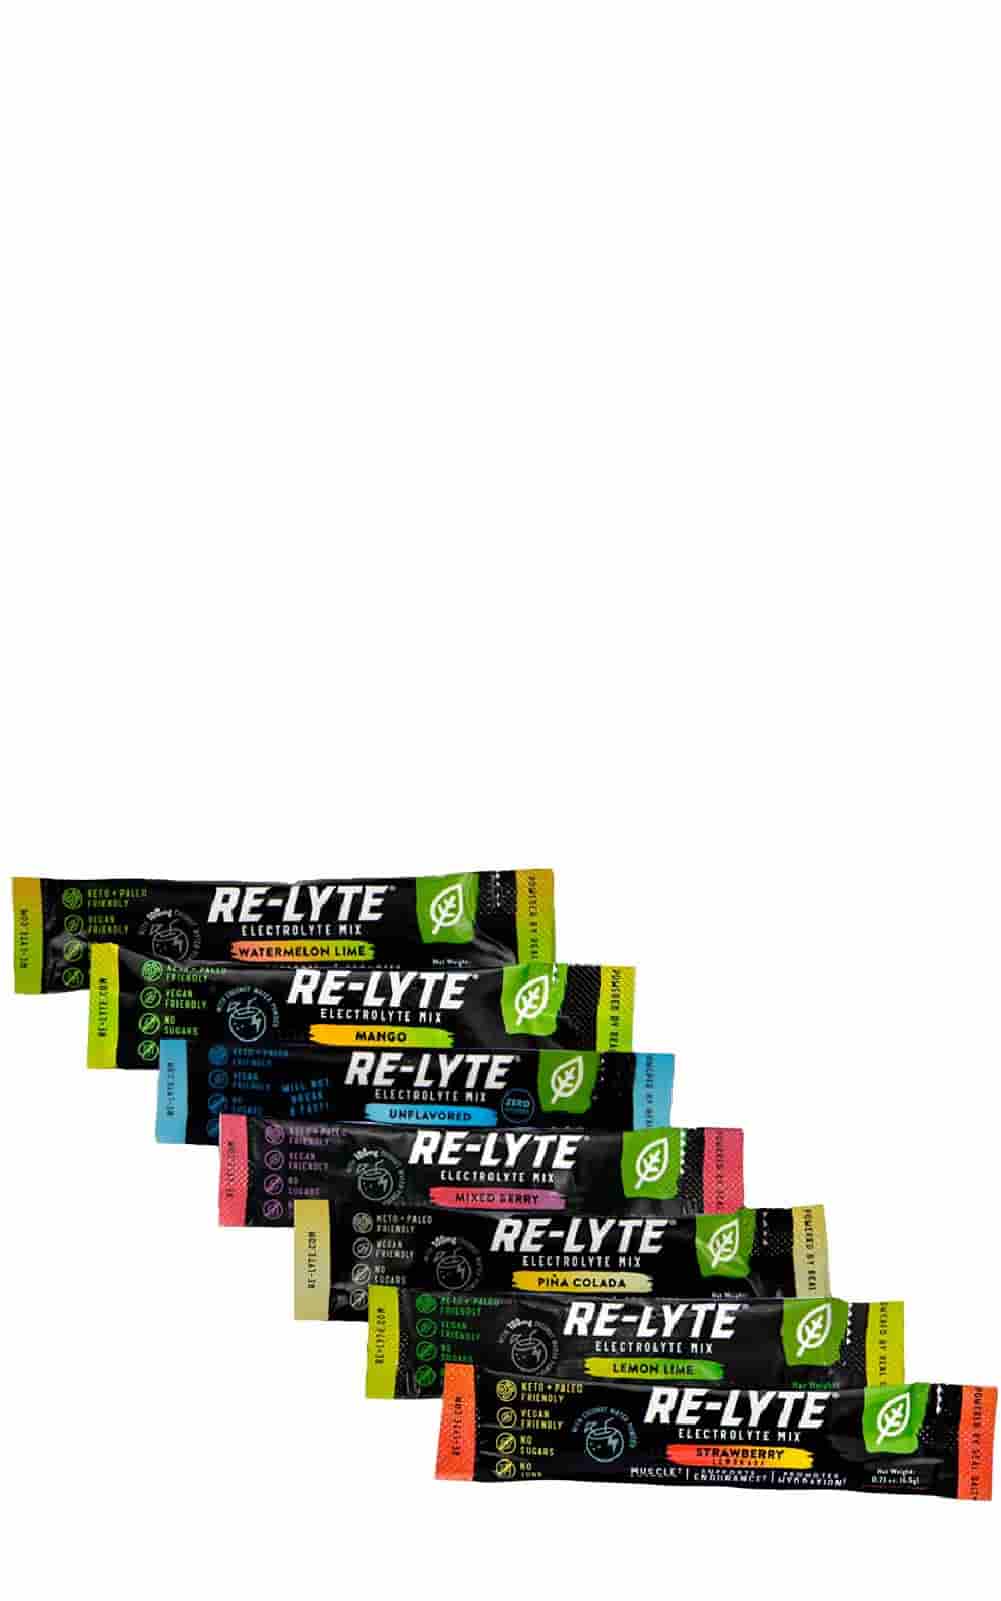 Re-Lyte Electrolyte Variety Pack